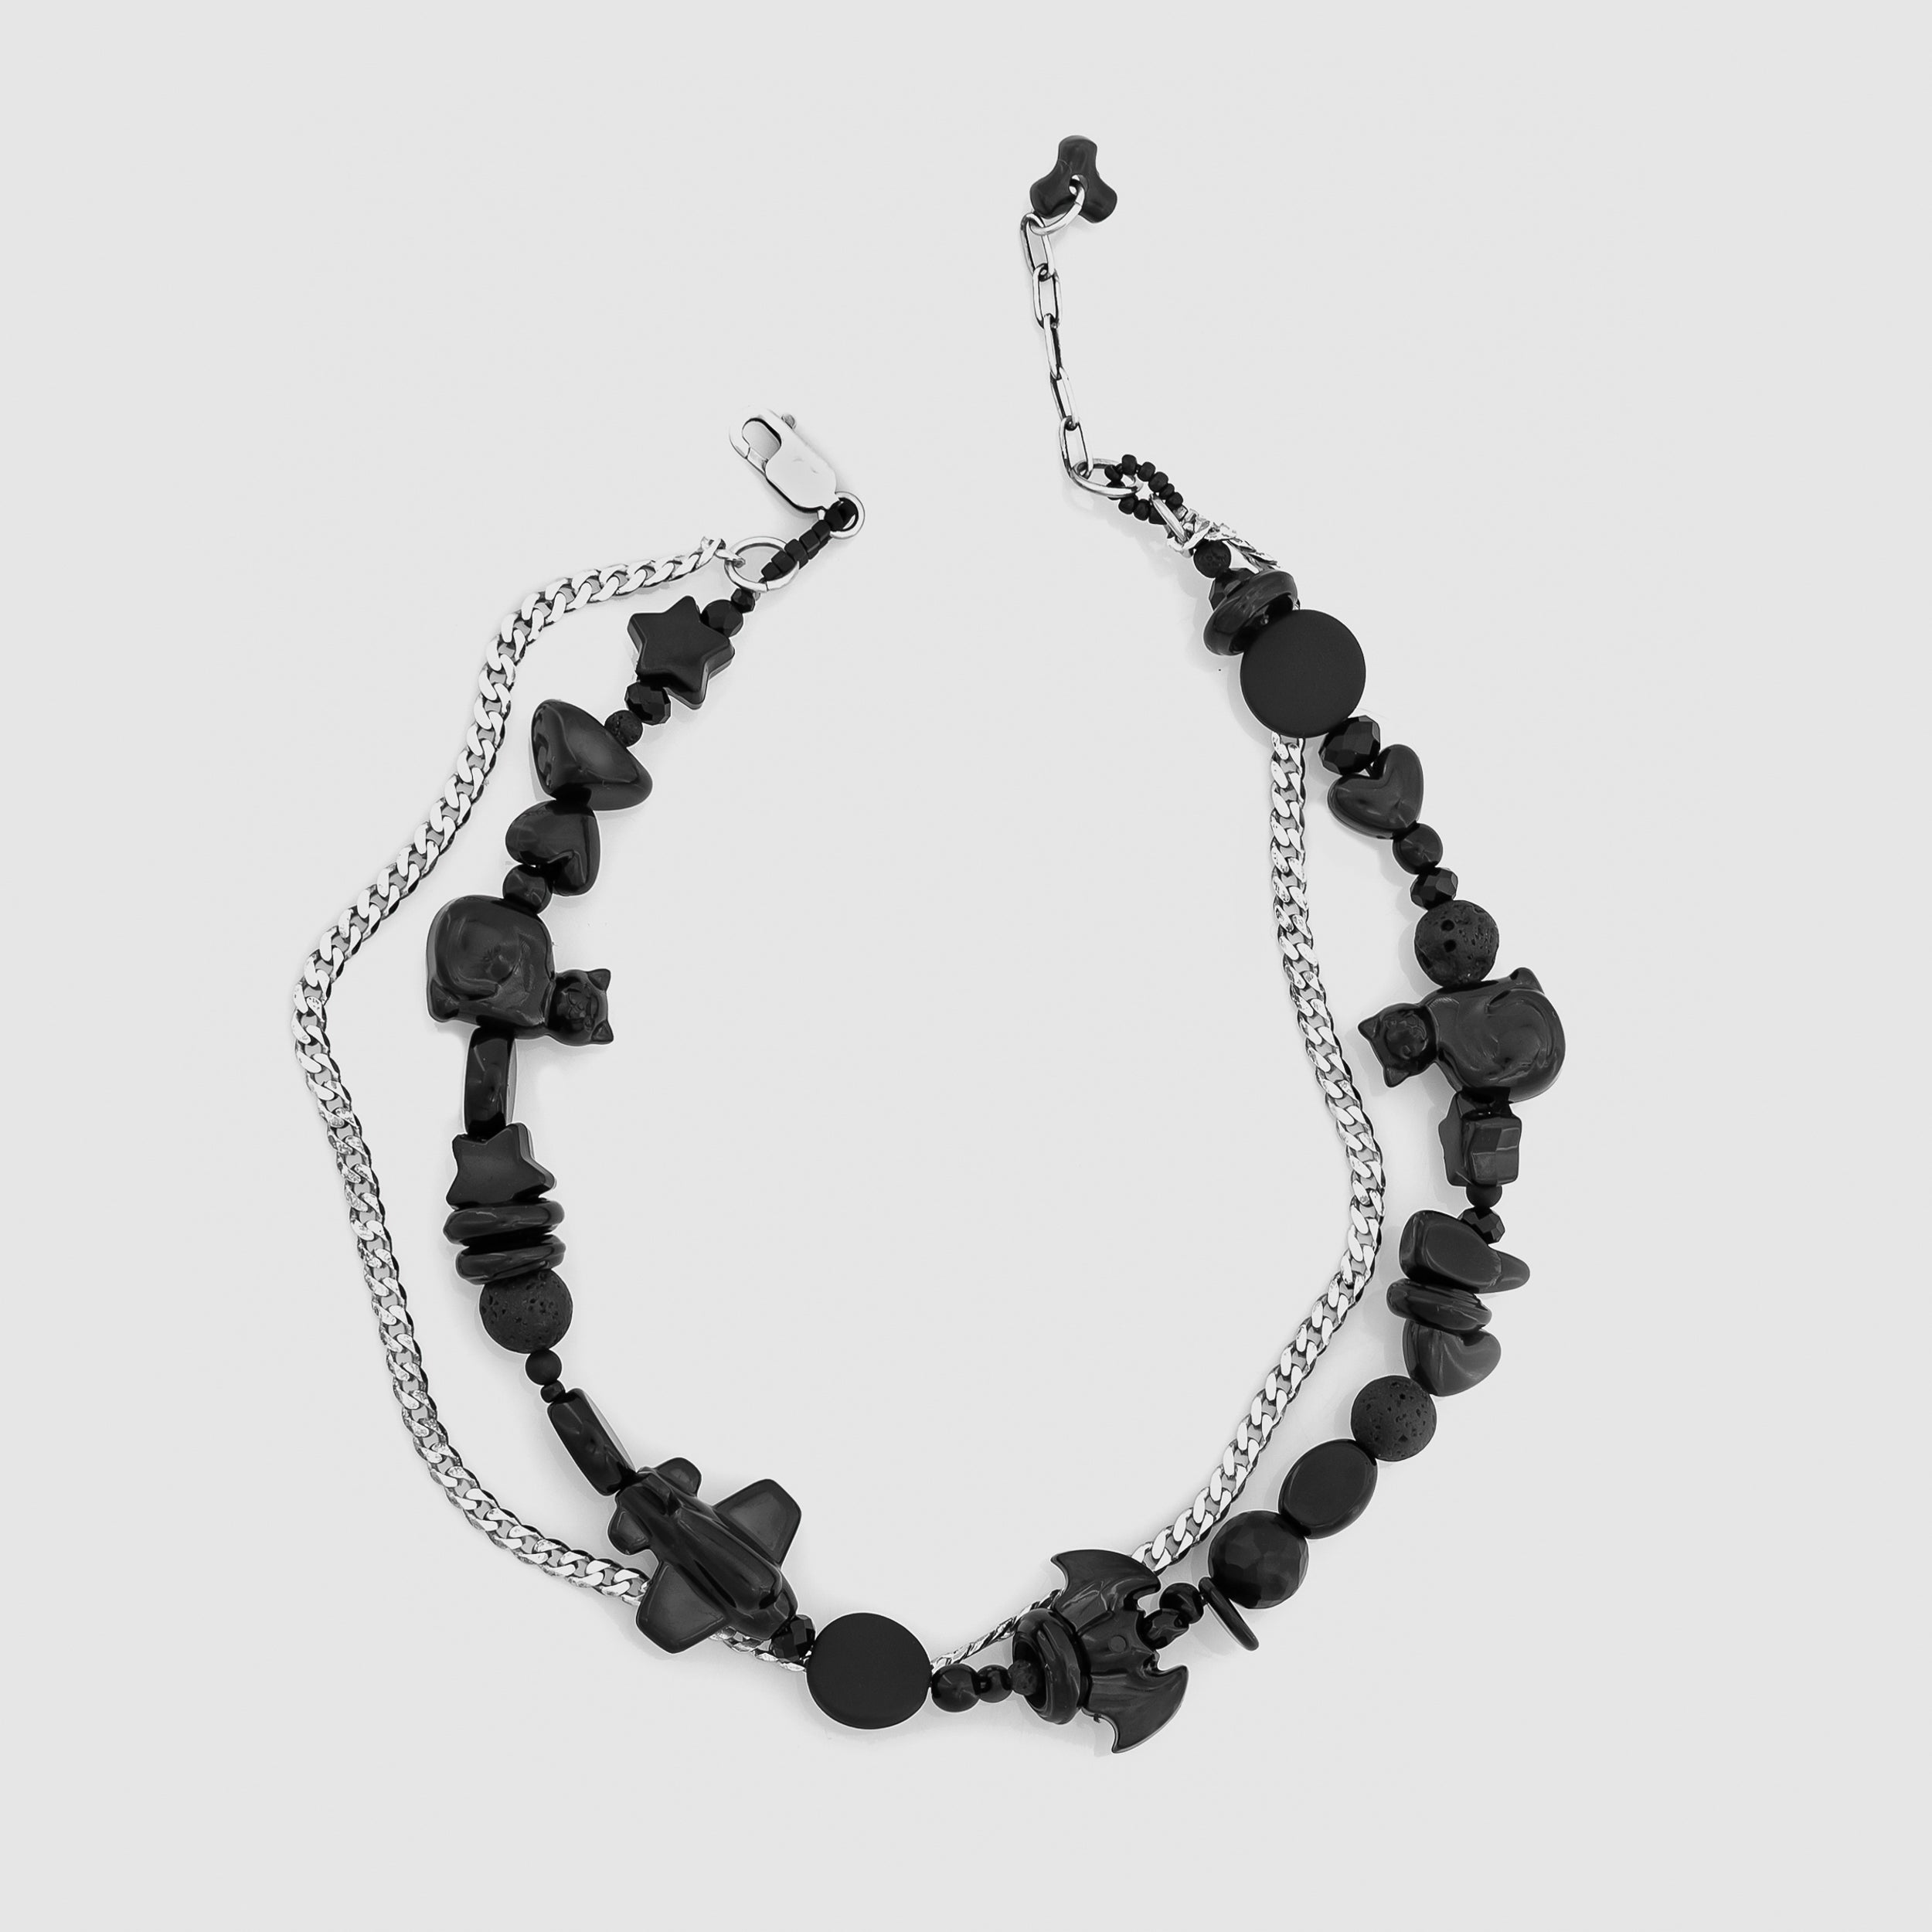 DS x O.A. Jewellery necklace - Dreamland Syndicate